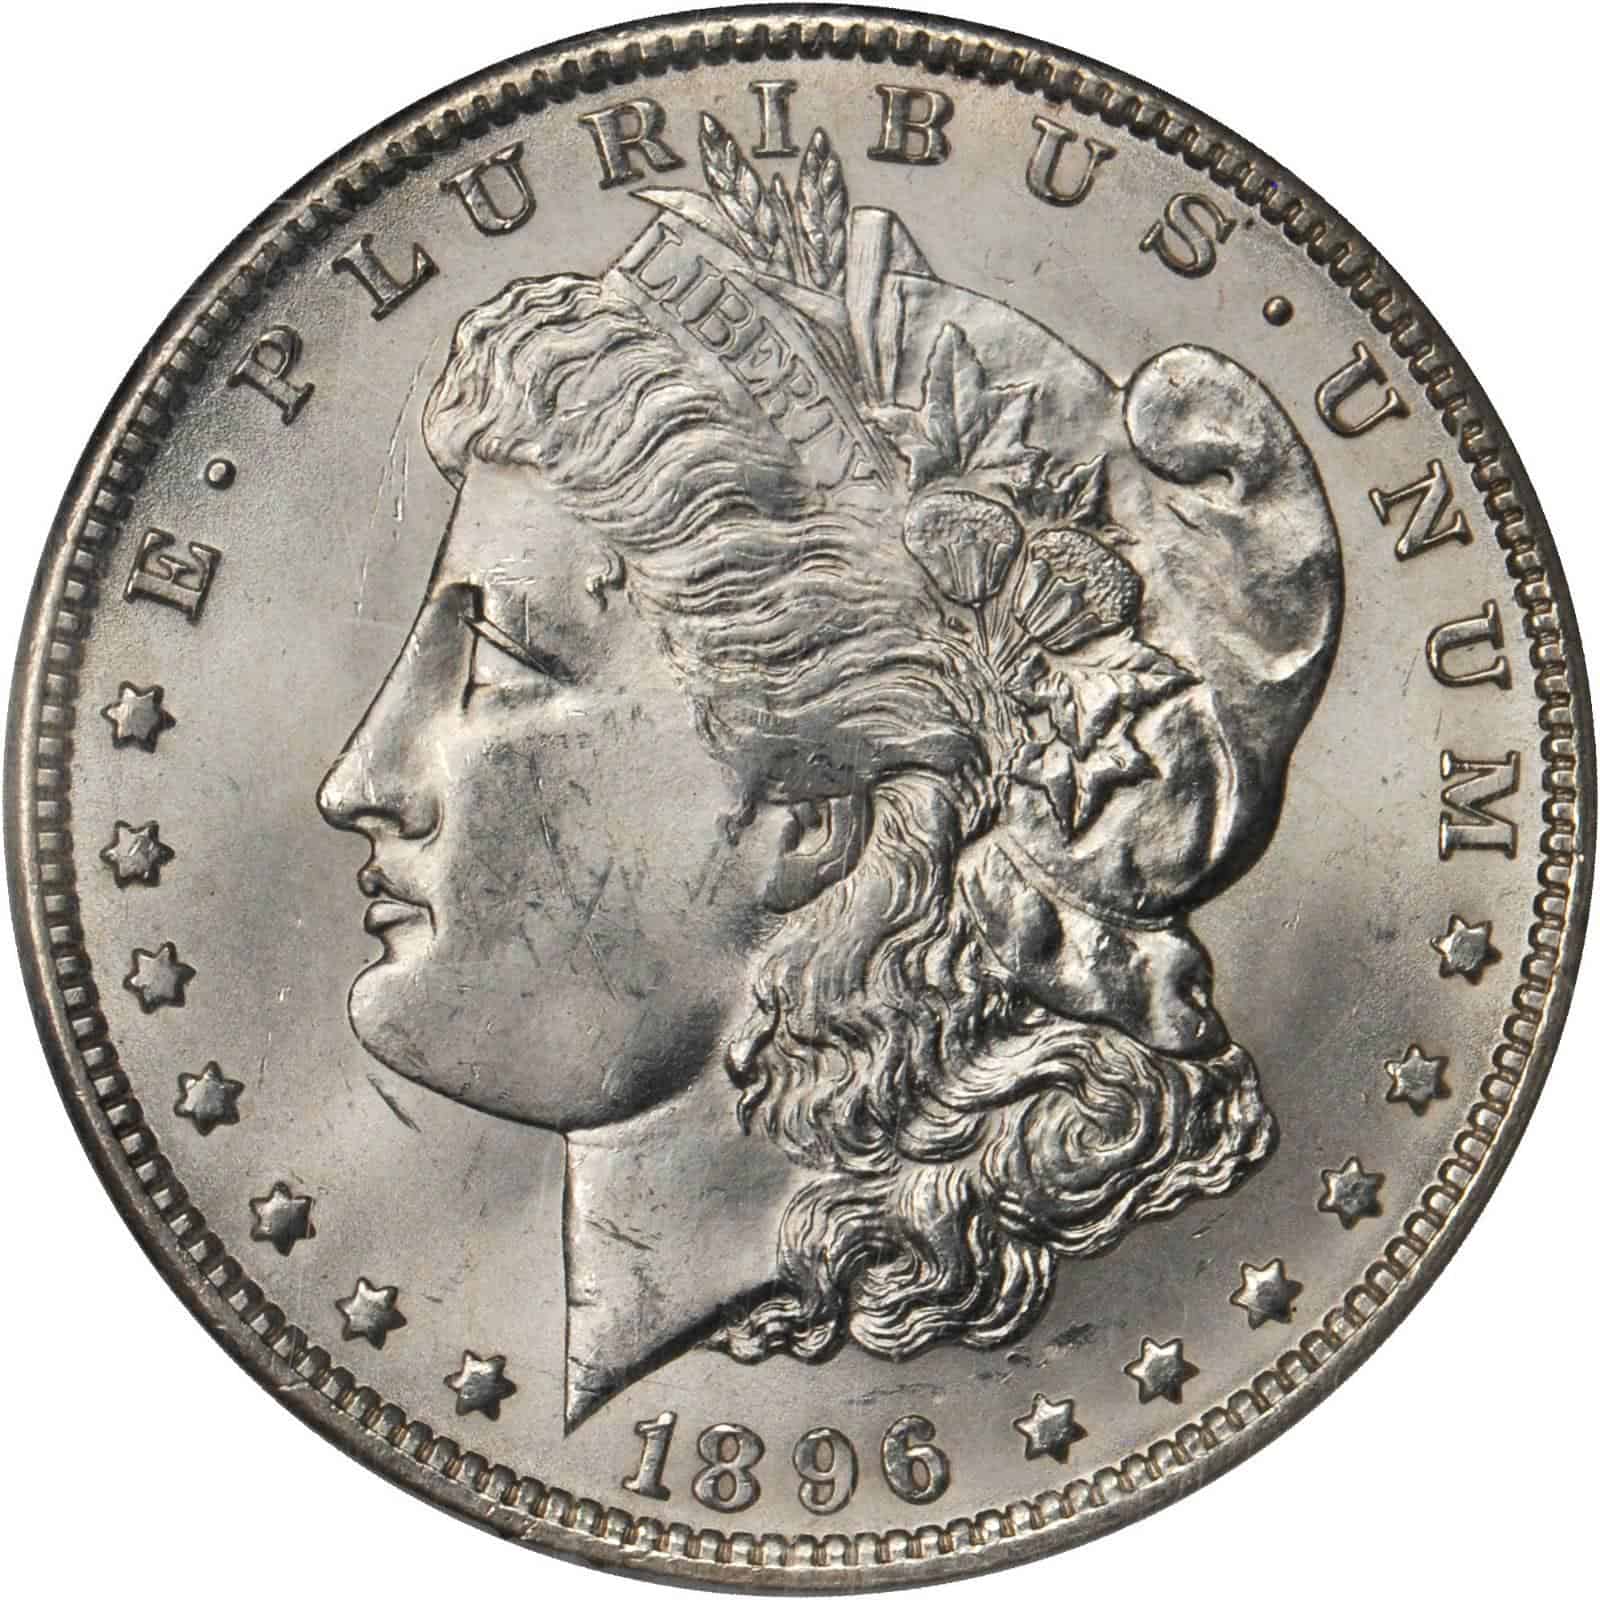 The Obverse of the 1896 Silver Dollar